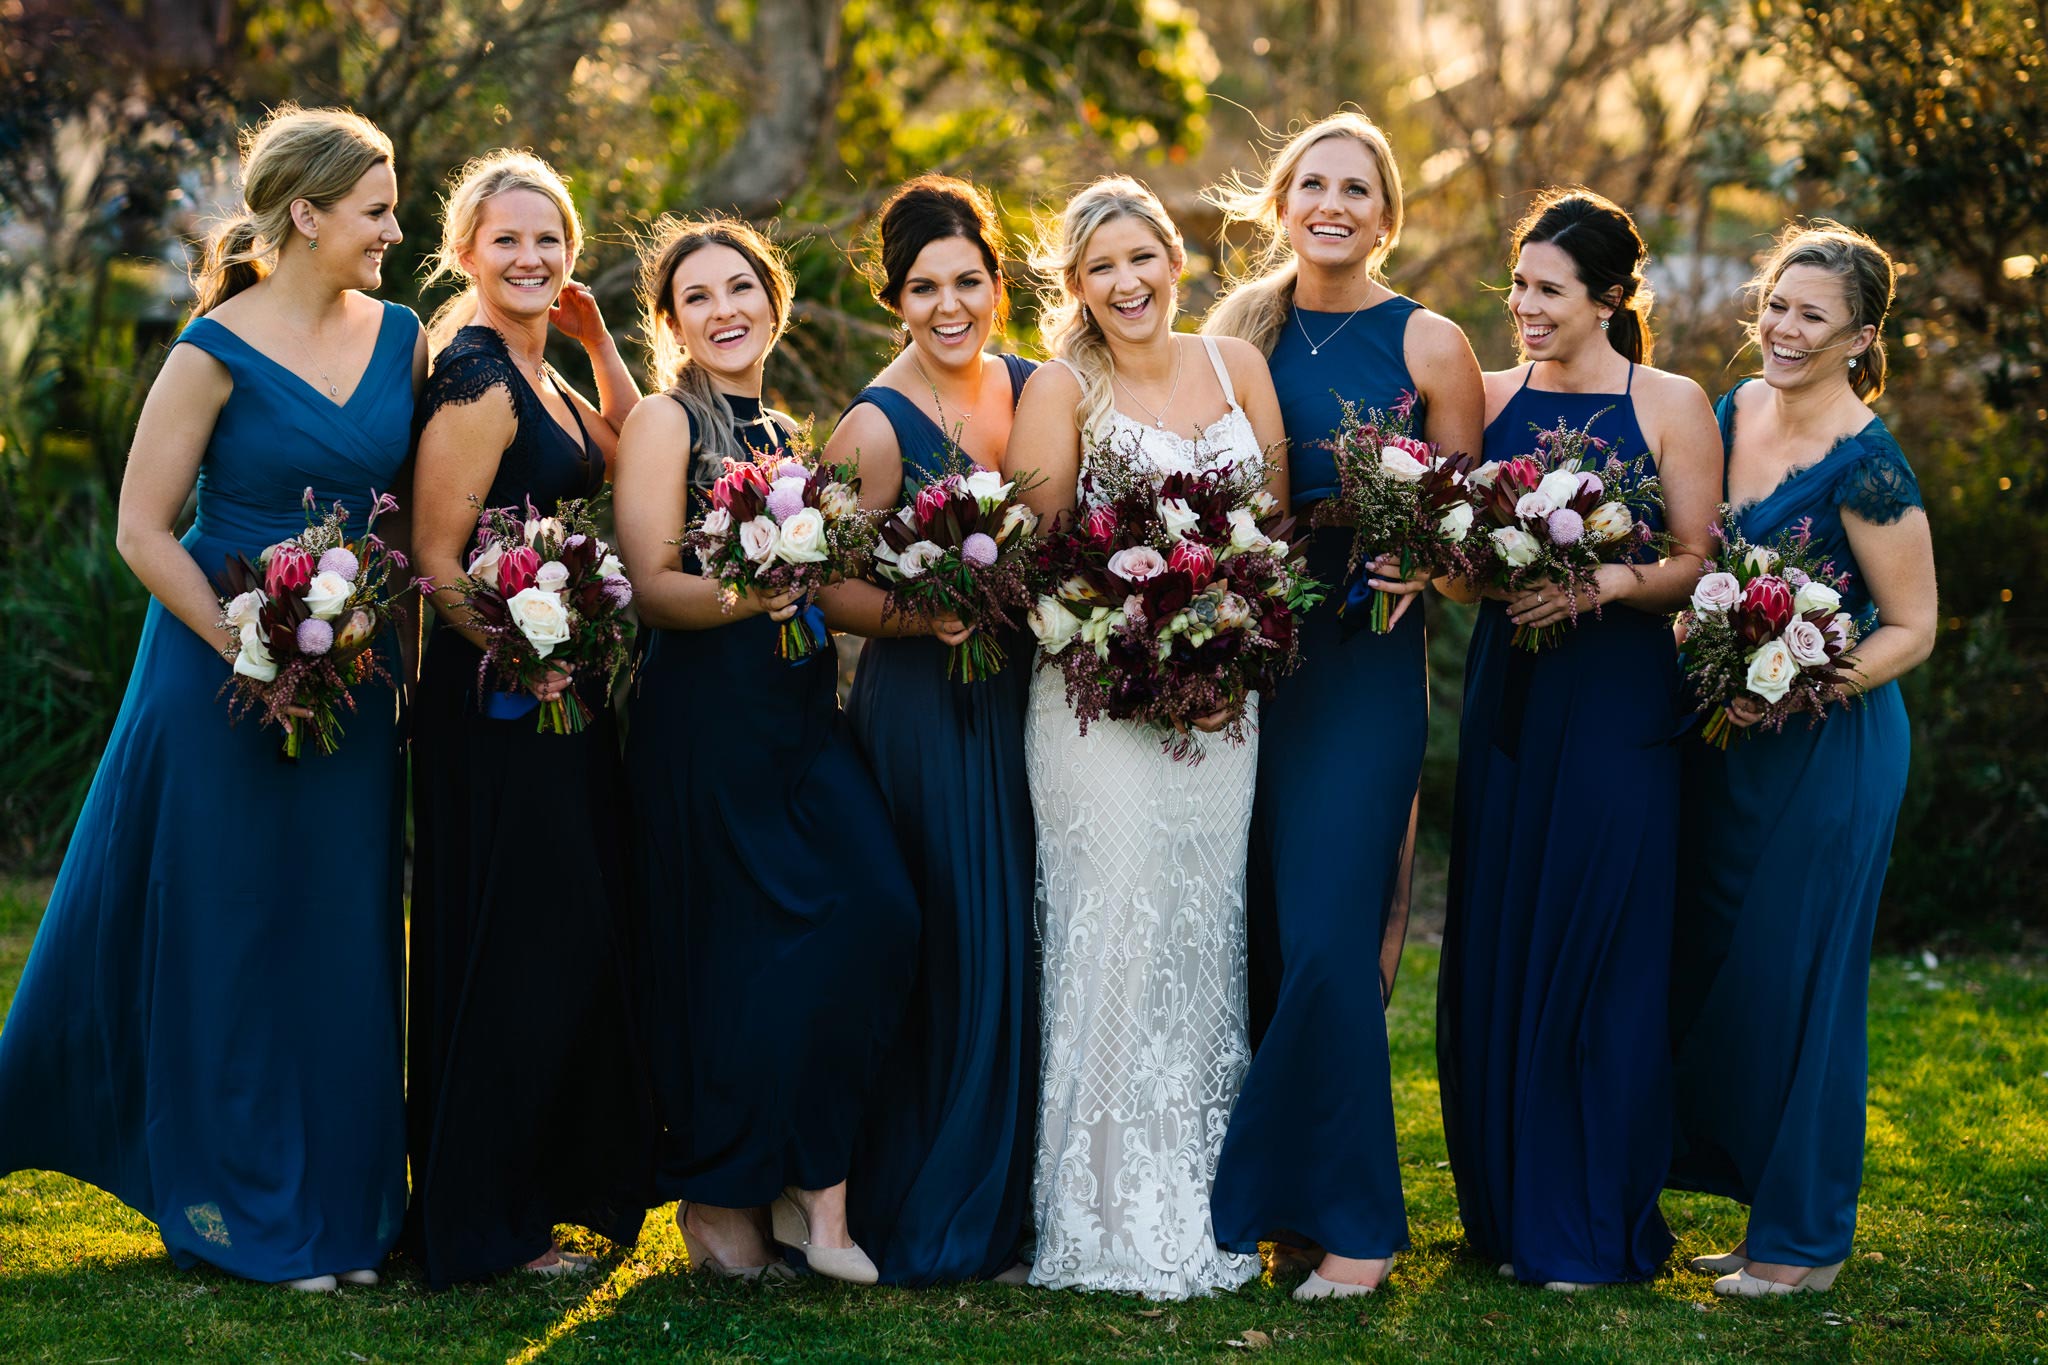 Bride with bridesmaids laughing at groomsmen